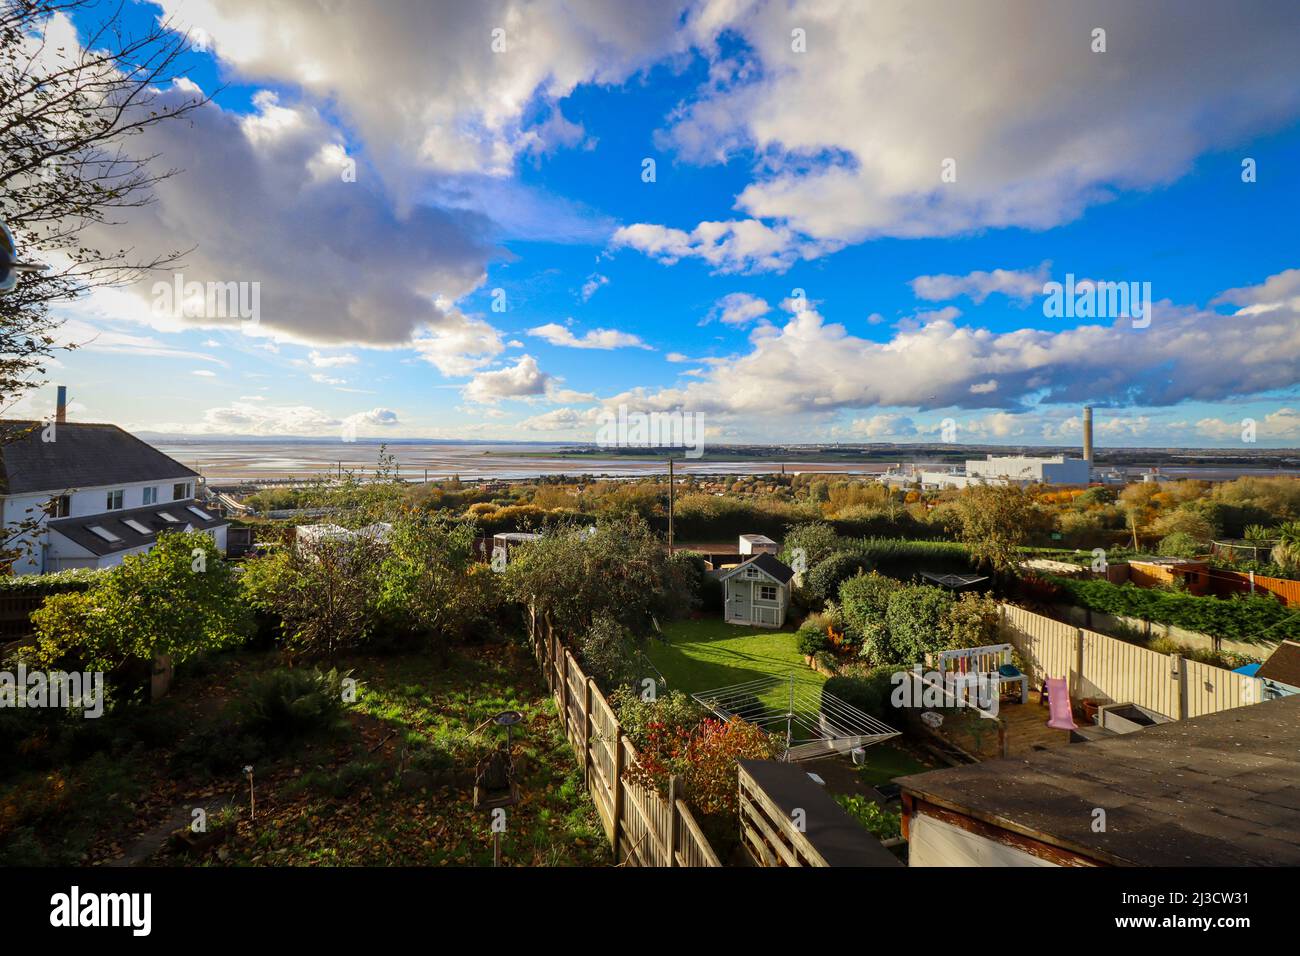 View over gardens, overlooking the River Mersey Marshes, Runcorn Stock Photo